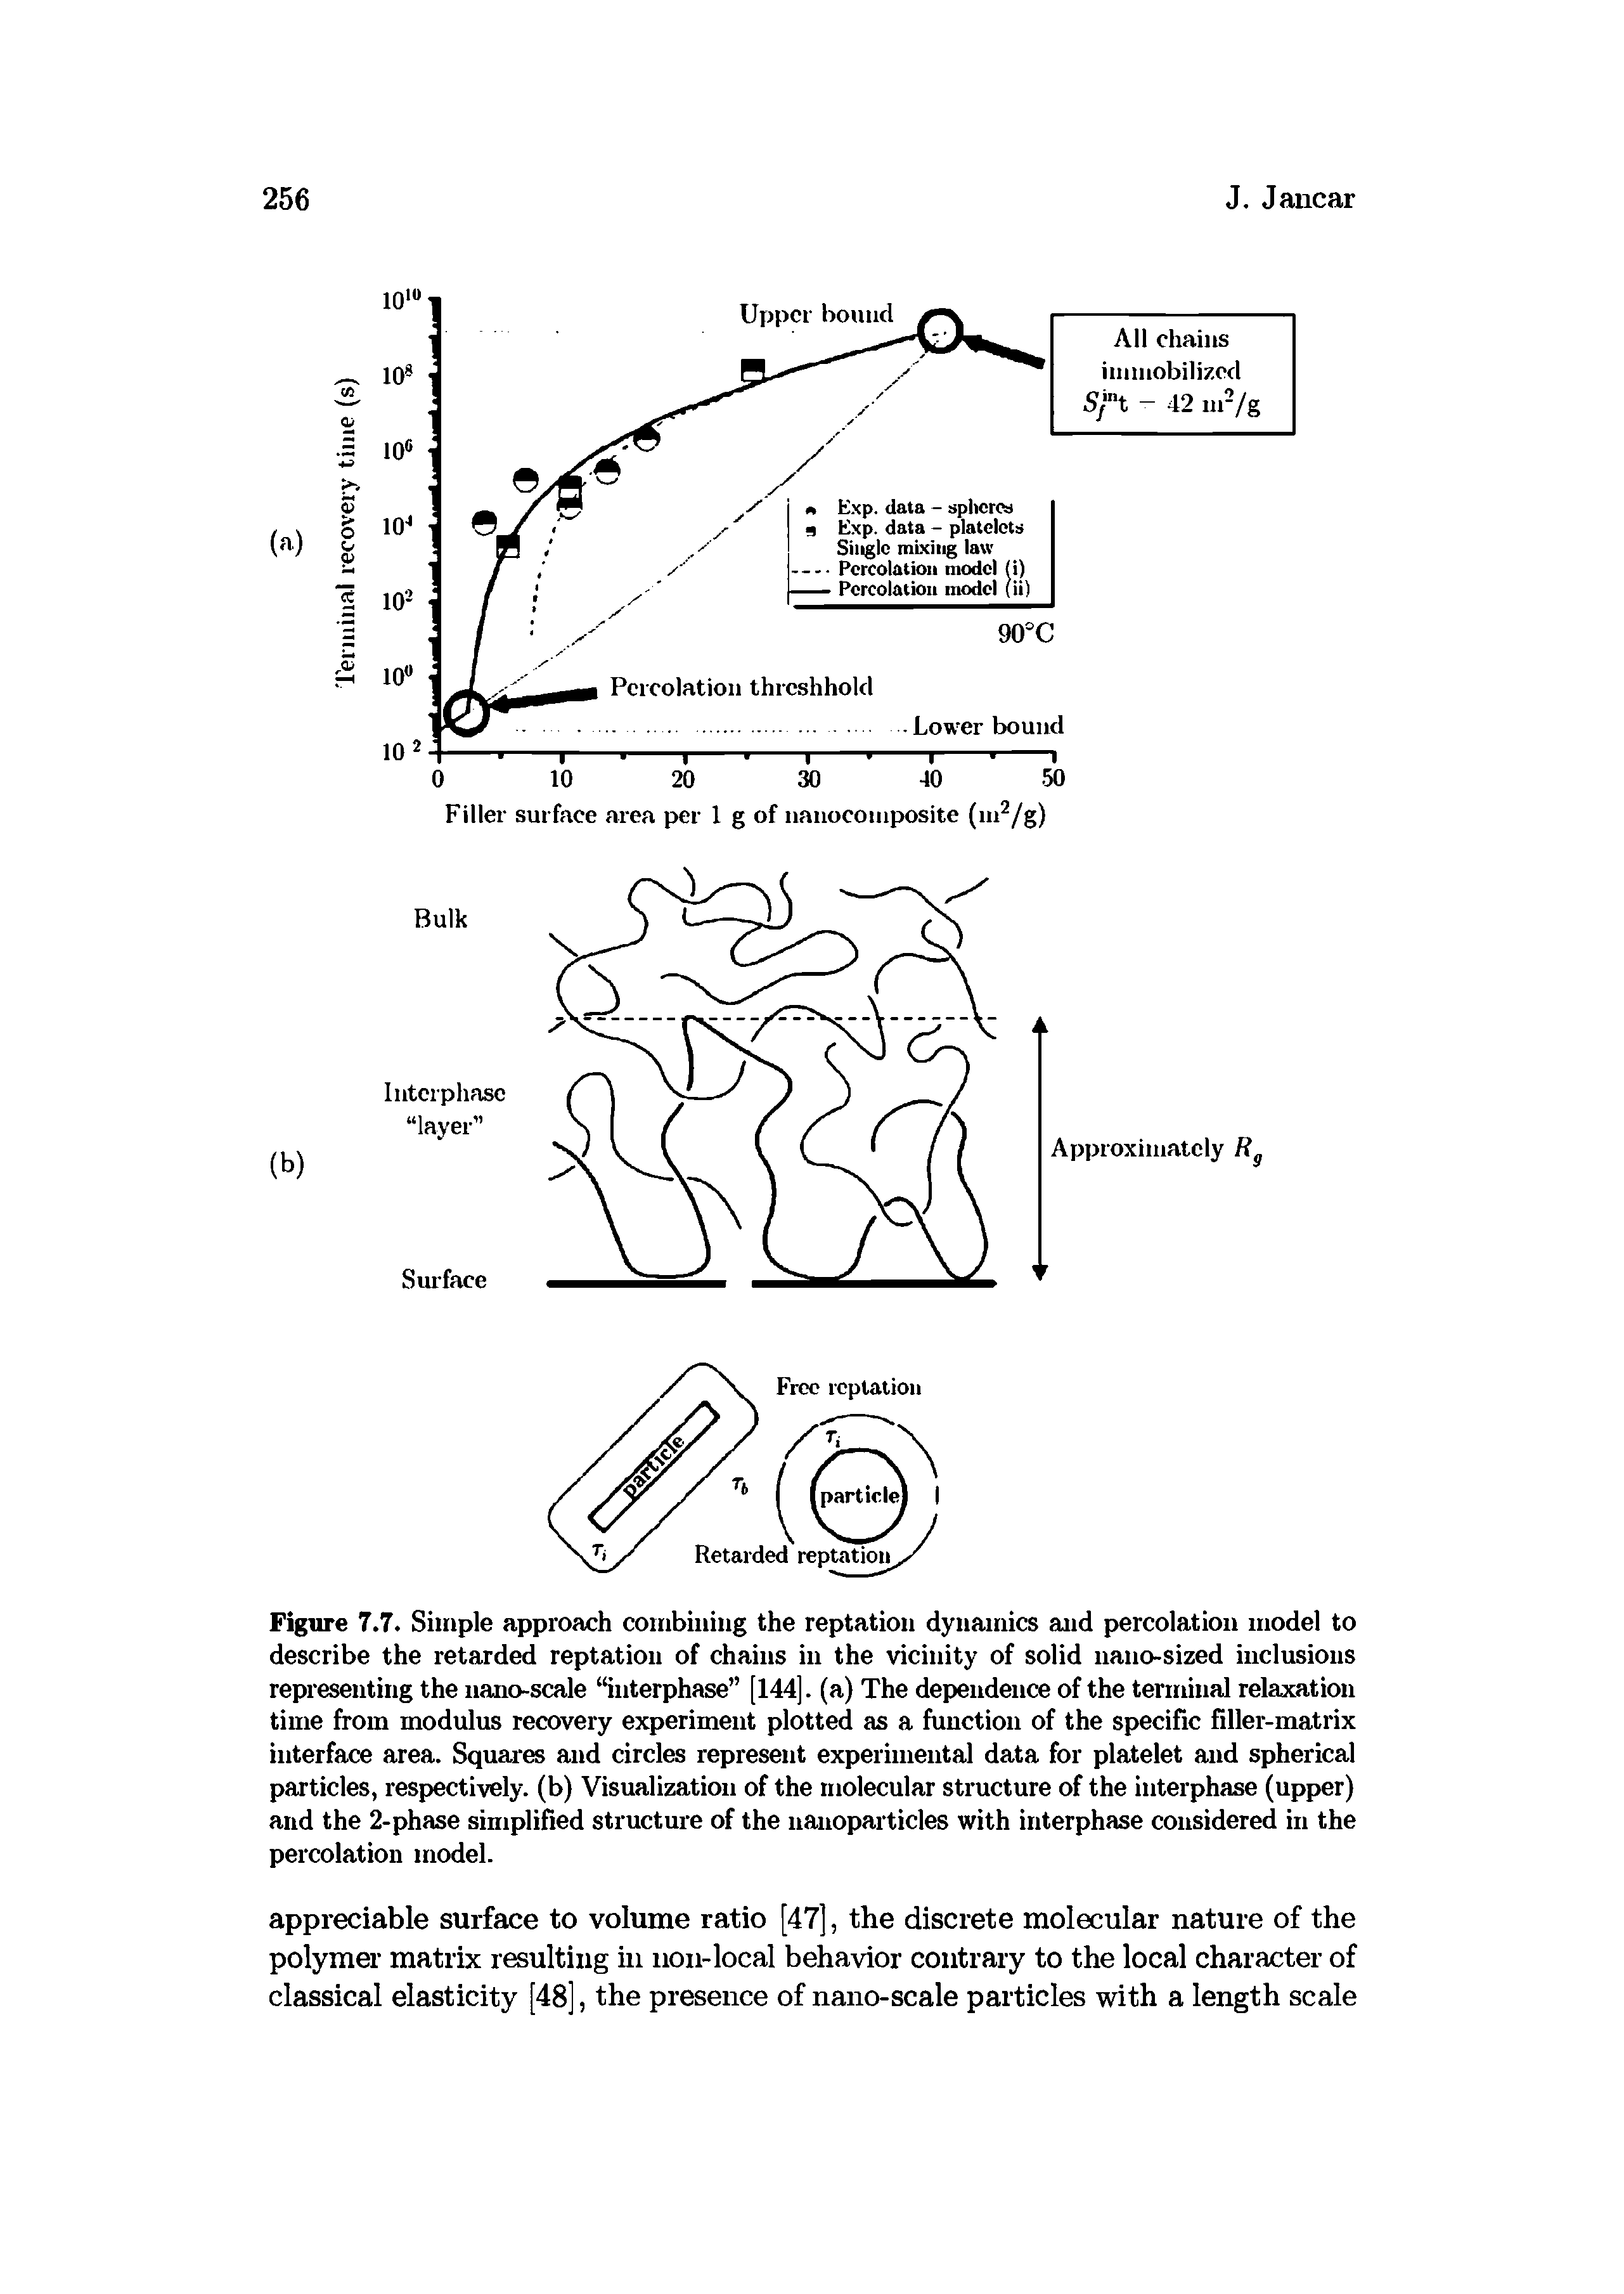 Figure 7.7. Simple approach combining the reptation dynamics and percolation model to describe the retarded reptation of chains in the vicinity of solid nanosized inclusions representing the iianoscale interphase [144]. (a) The dependence of the tenniiial relaxation time from modulus recovery experiment plotted as a function of the specific filler-matrix interface area. Squares and circles represent experimental data for platelet and spherical particles, respectively, (b) Visualization of the molecular structure of the interphase (upper) and the 2-phase simplified structure of the uauoparticles with interphase considered in the percolation model.